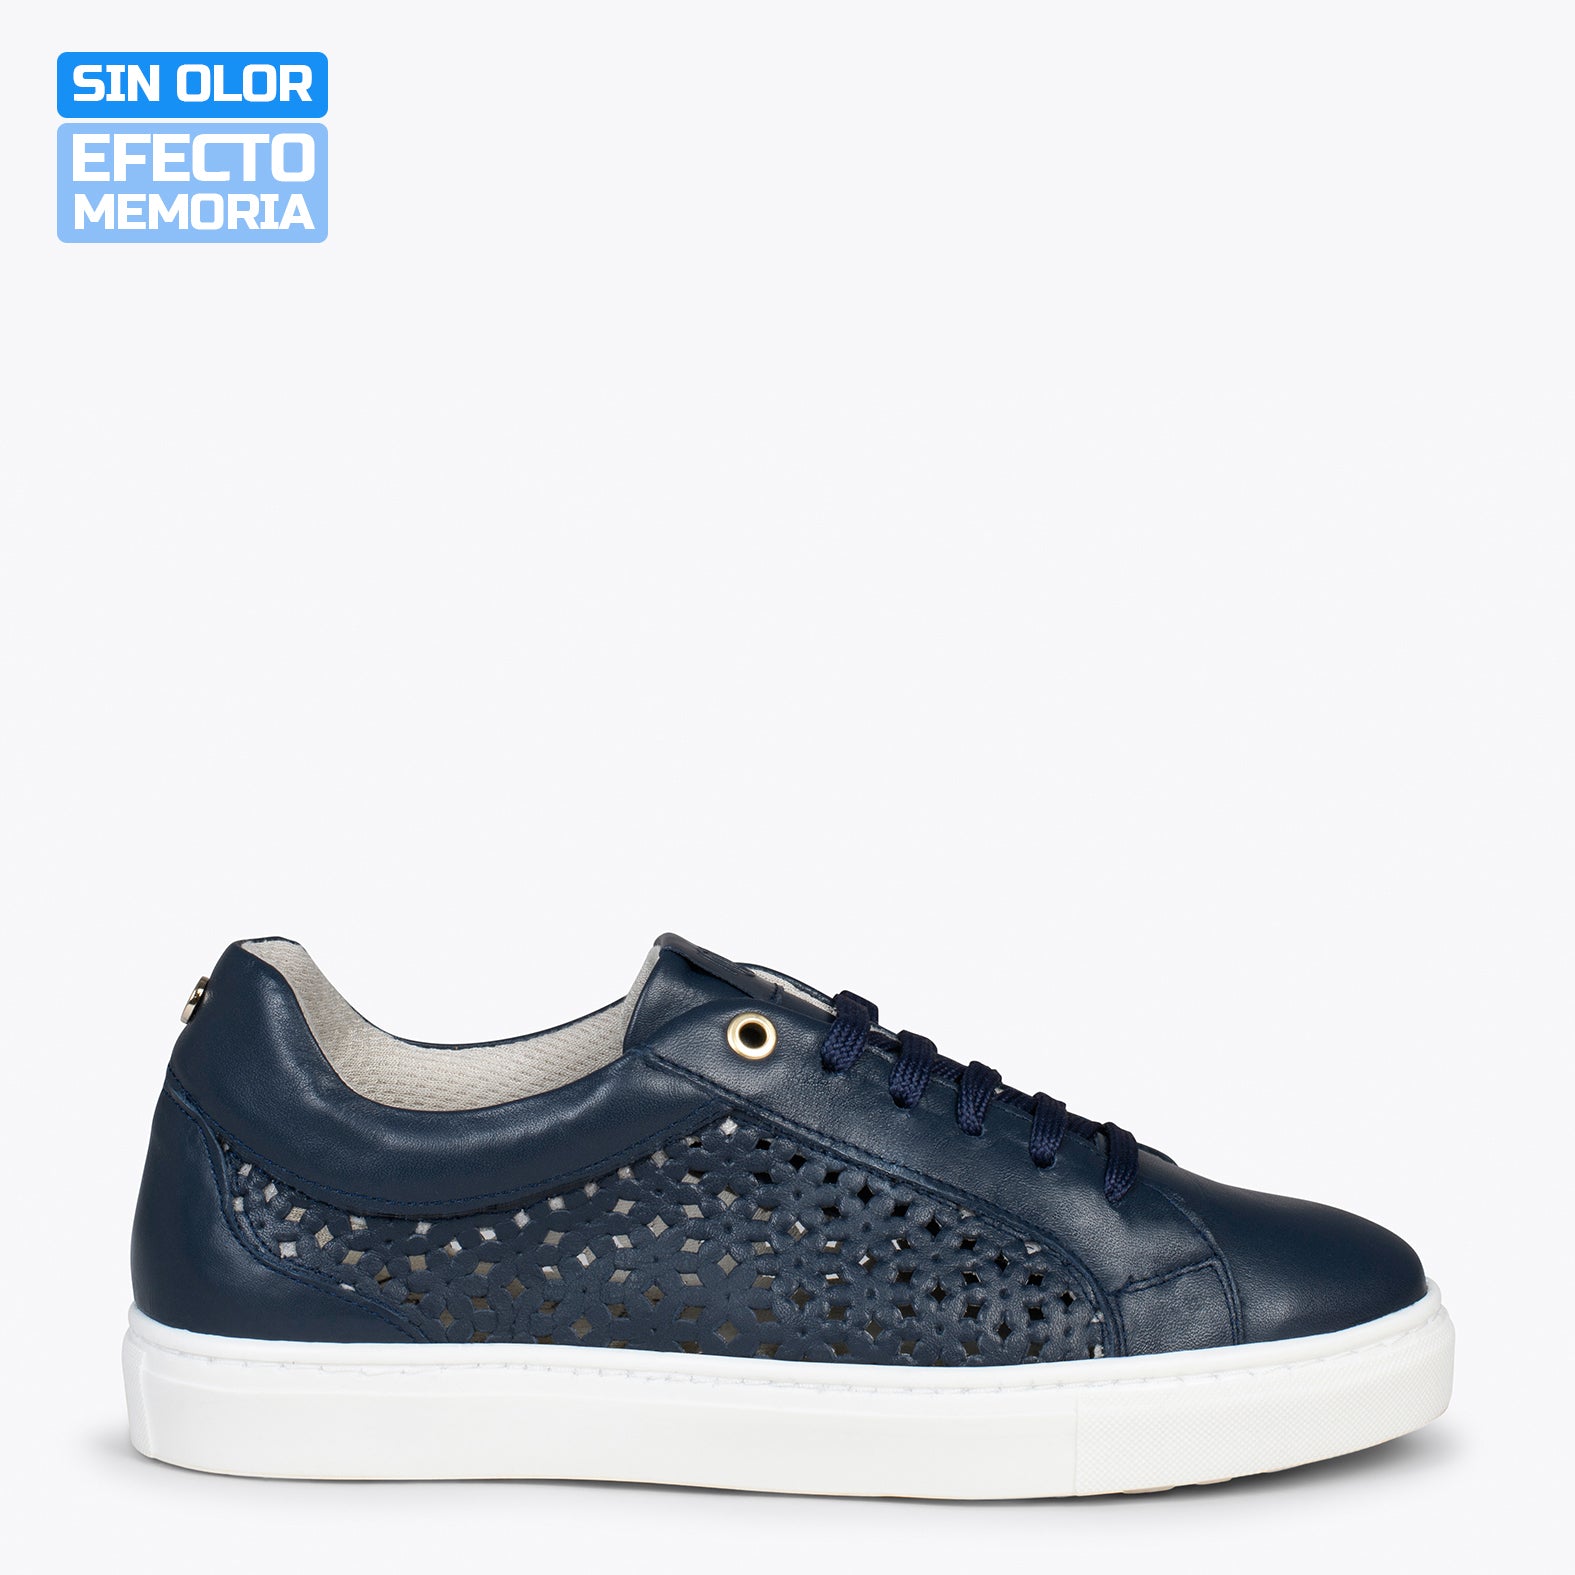 BREATHE – NAVY nappa sneakers with dye-cutting design